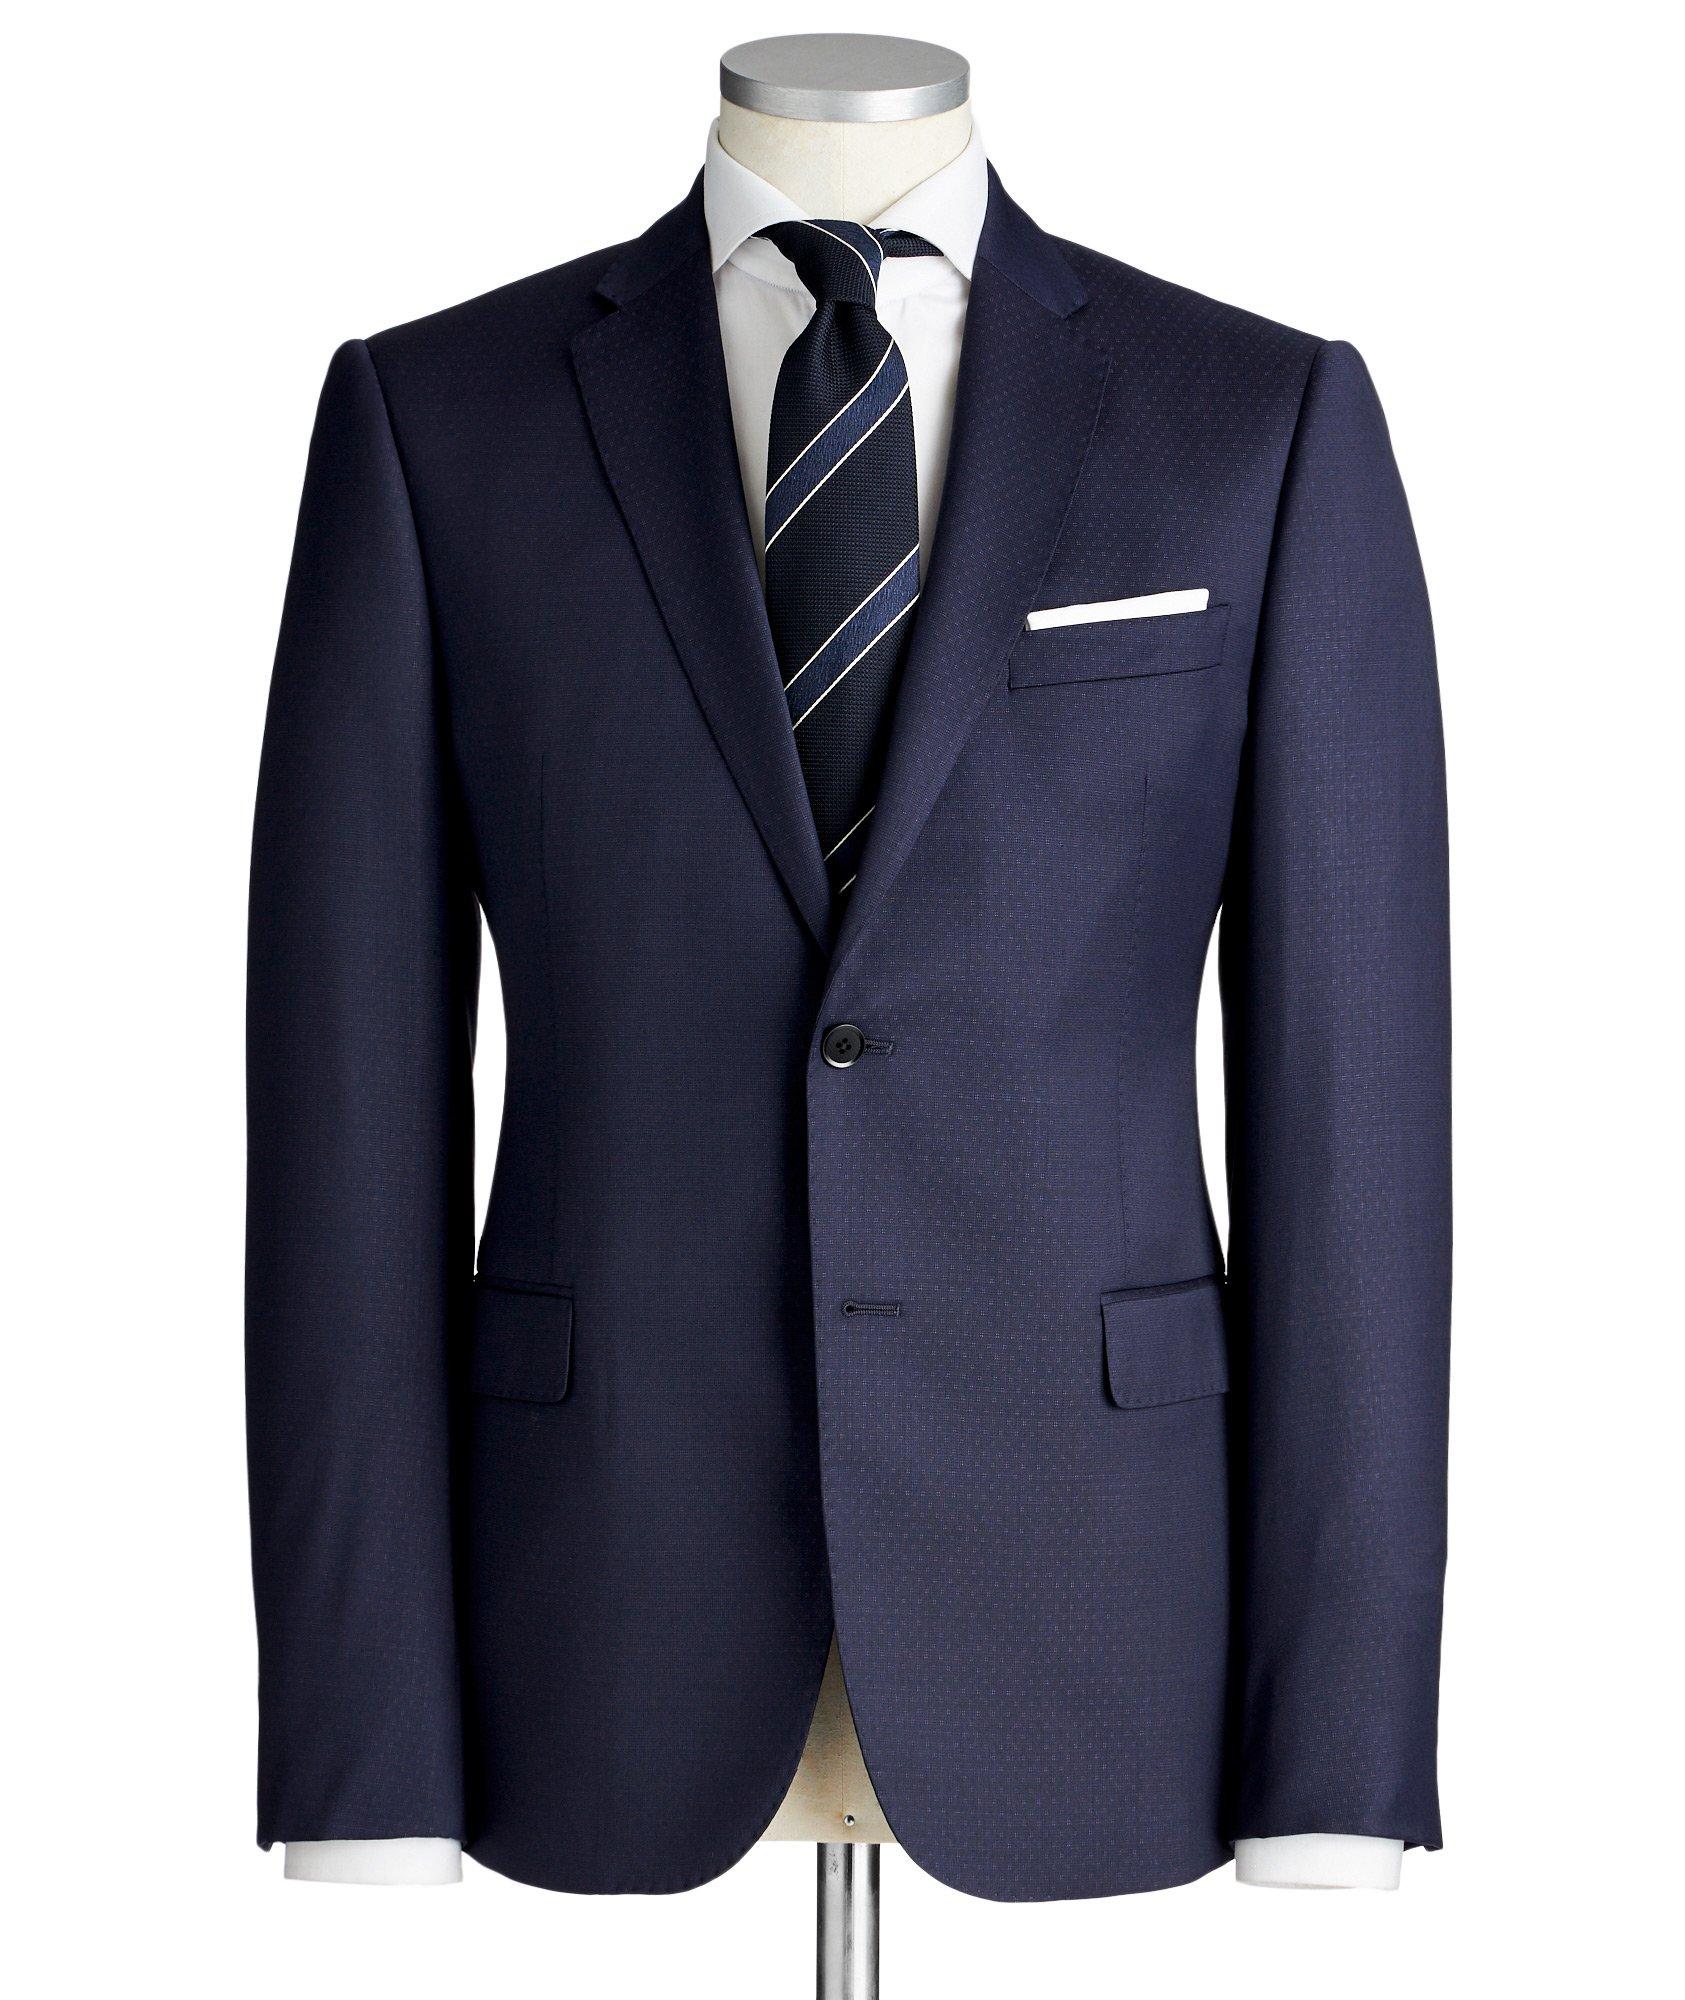 M-Line Checked Suit image 0